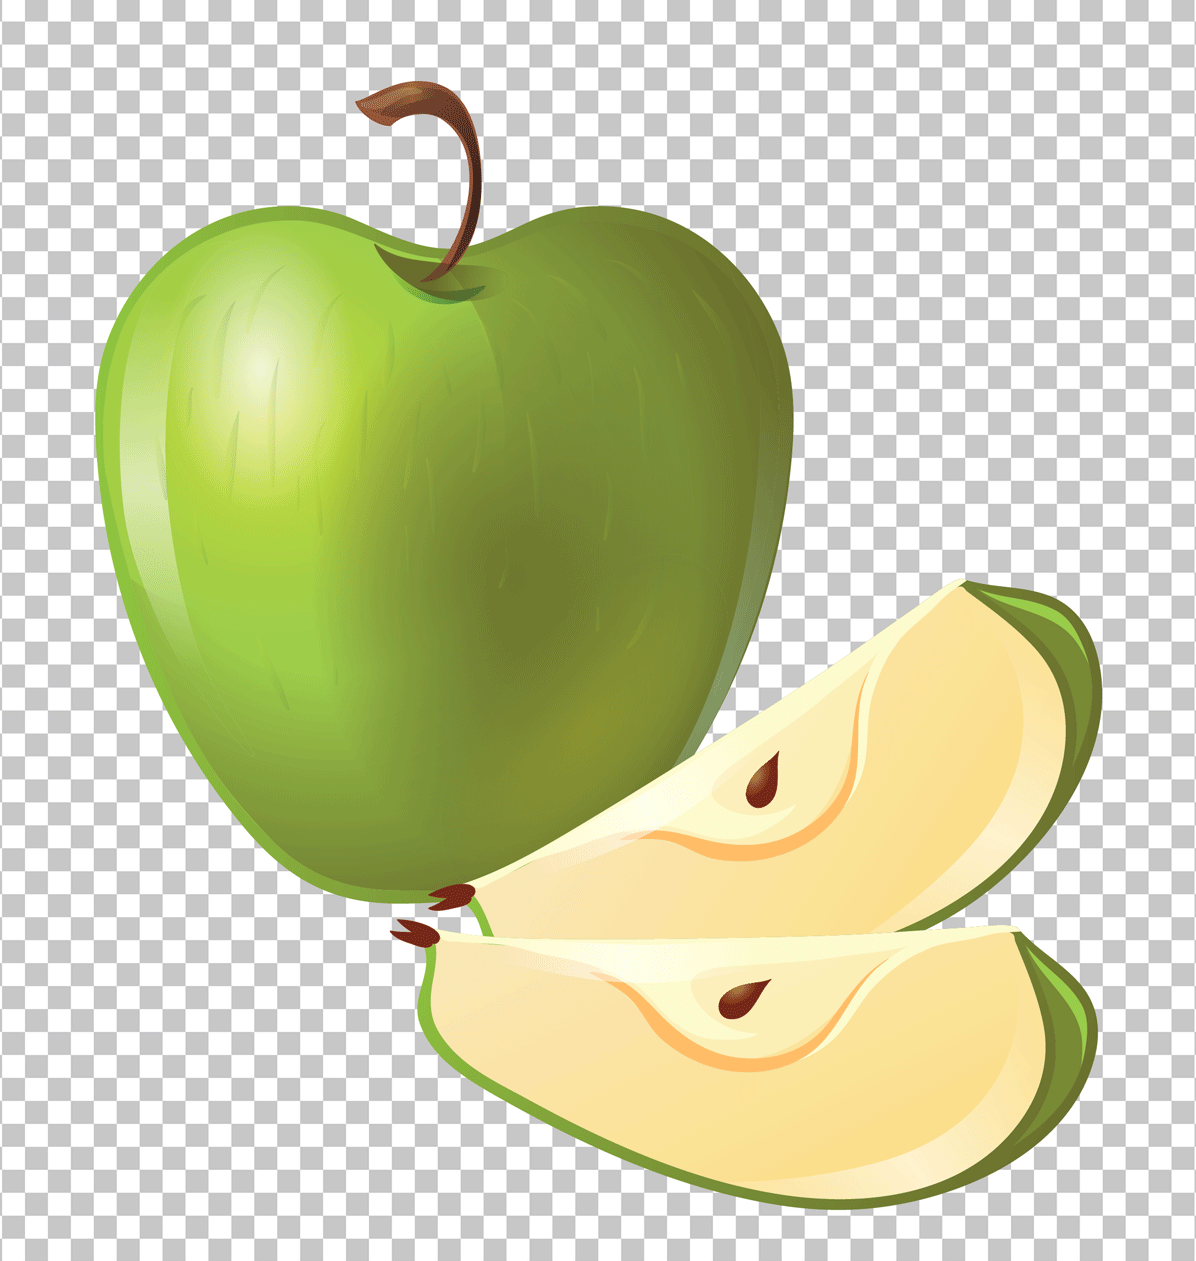 Green Apple PNG Image with Slice on Transparent Background